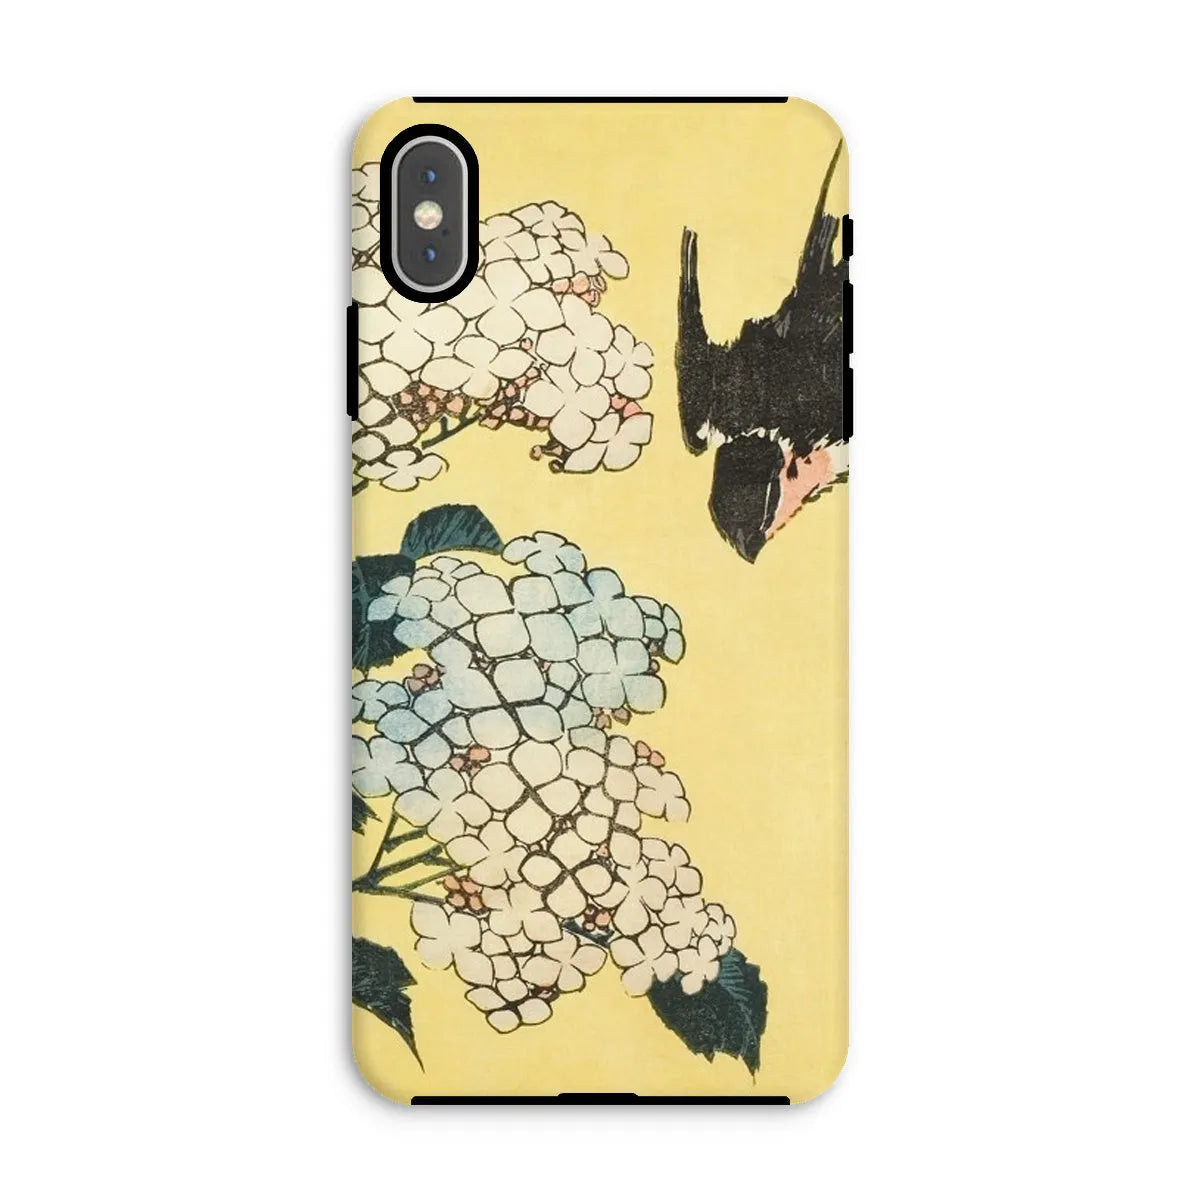 Hydrangea And Swallow - Japanese Art Phone Case - Hokusai - Iphone Xs Max / Matte - Mobile Phone Cases - Aesthetic Art